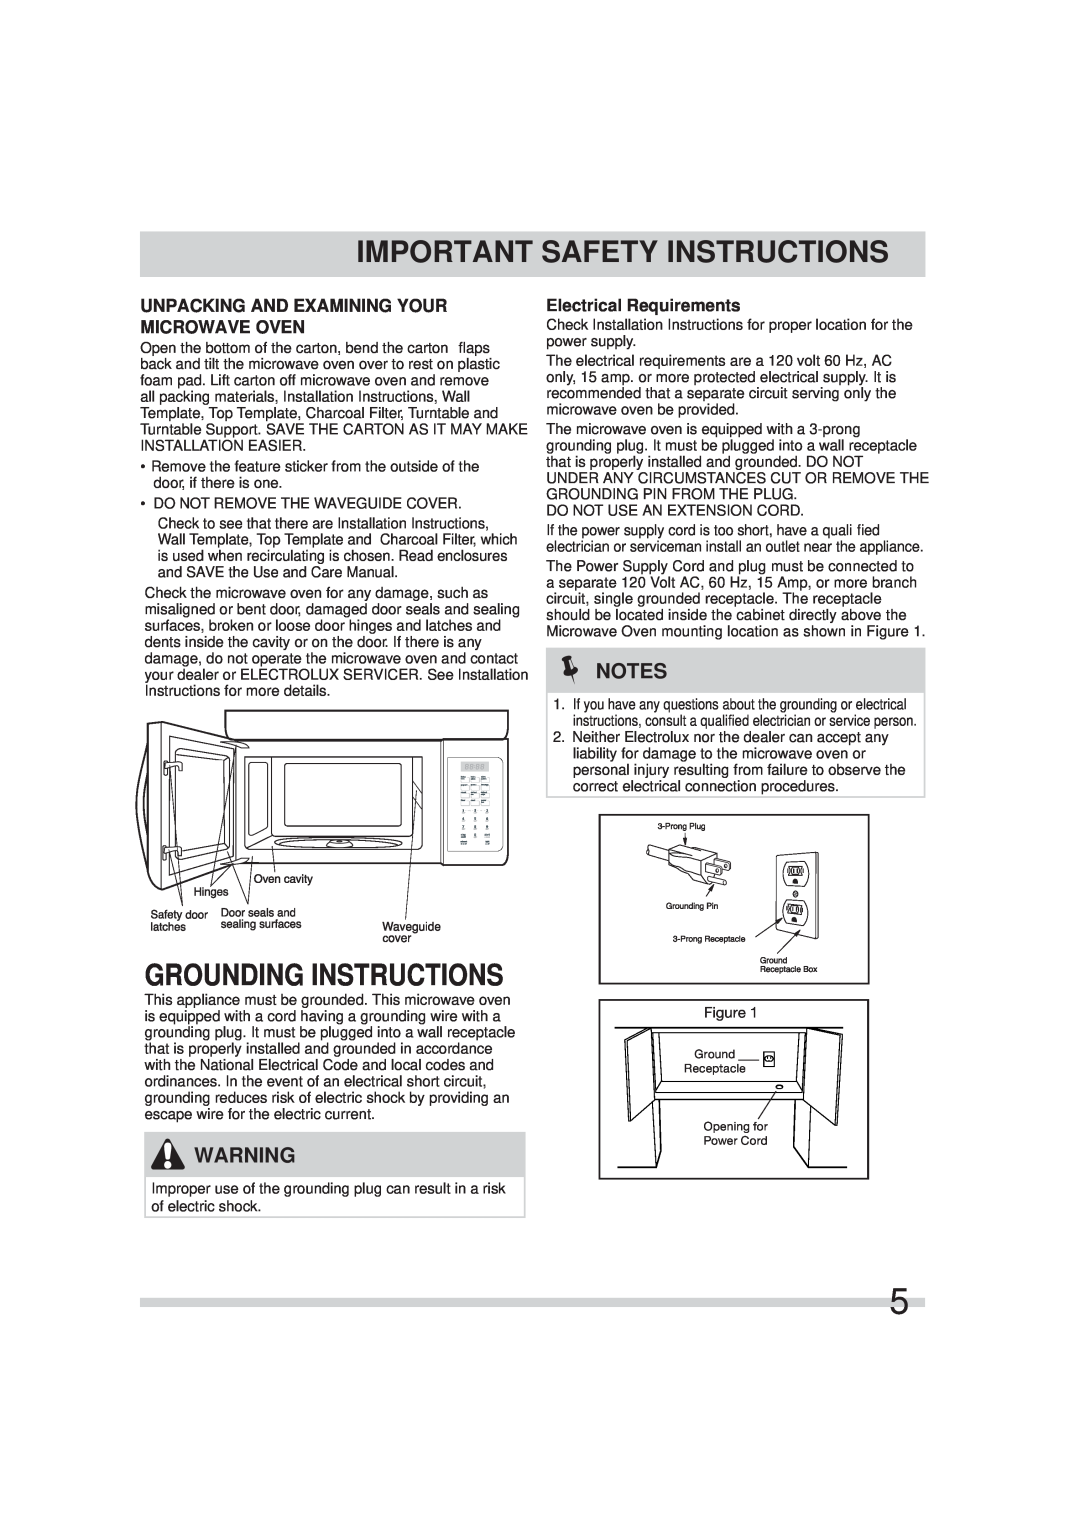 Frigidaire FFMV152CLW Grounding Instructions, Unpacking And Examining Your Microwave Oven, Important Safety Instructions 